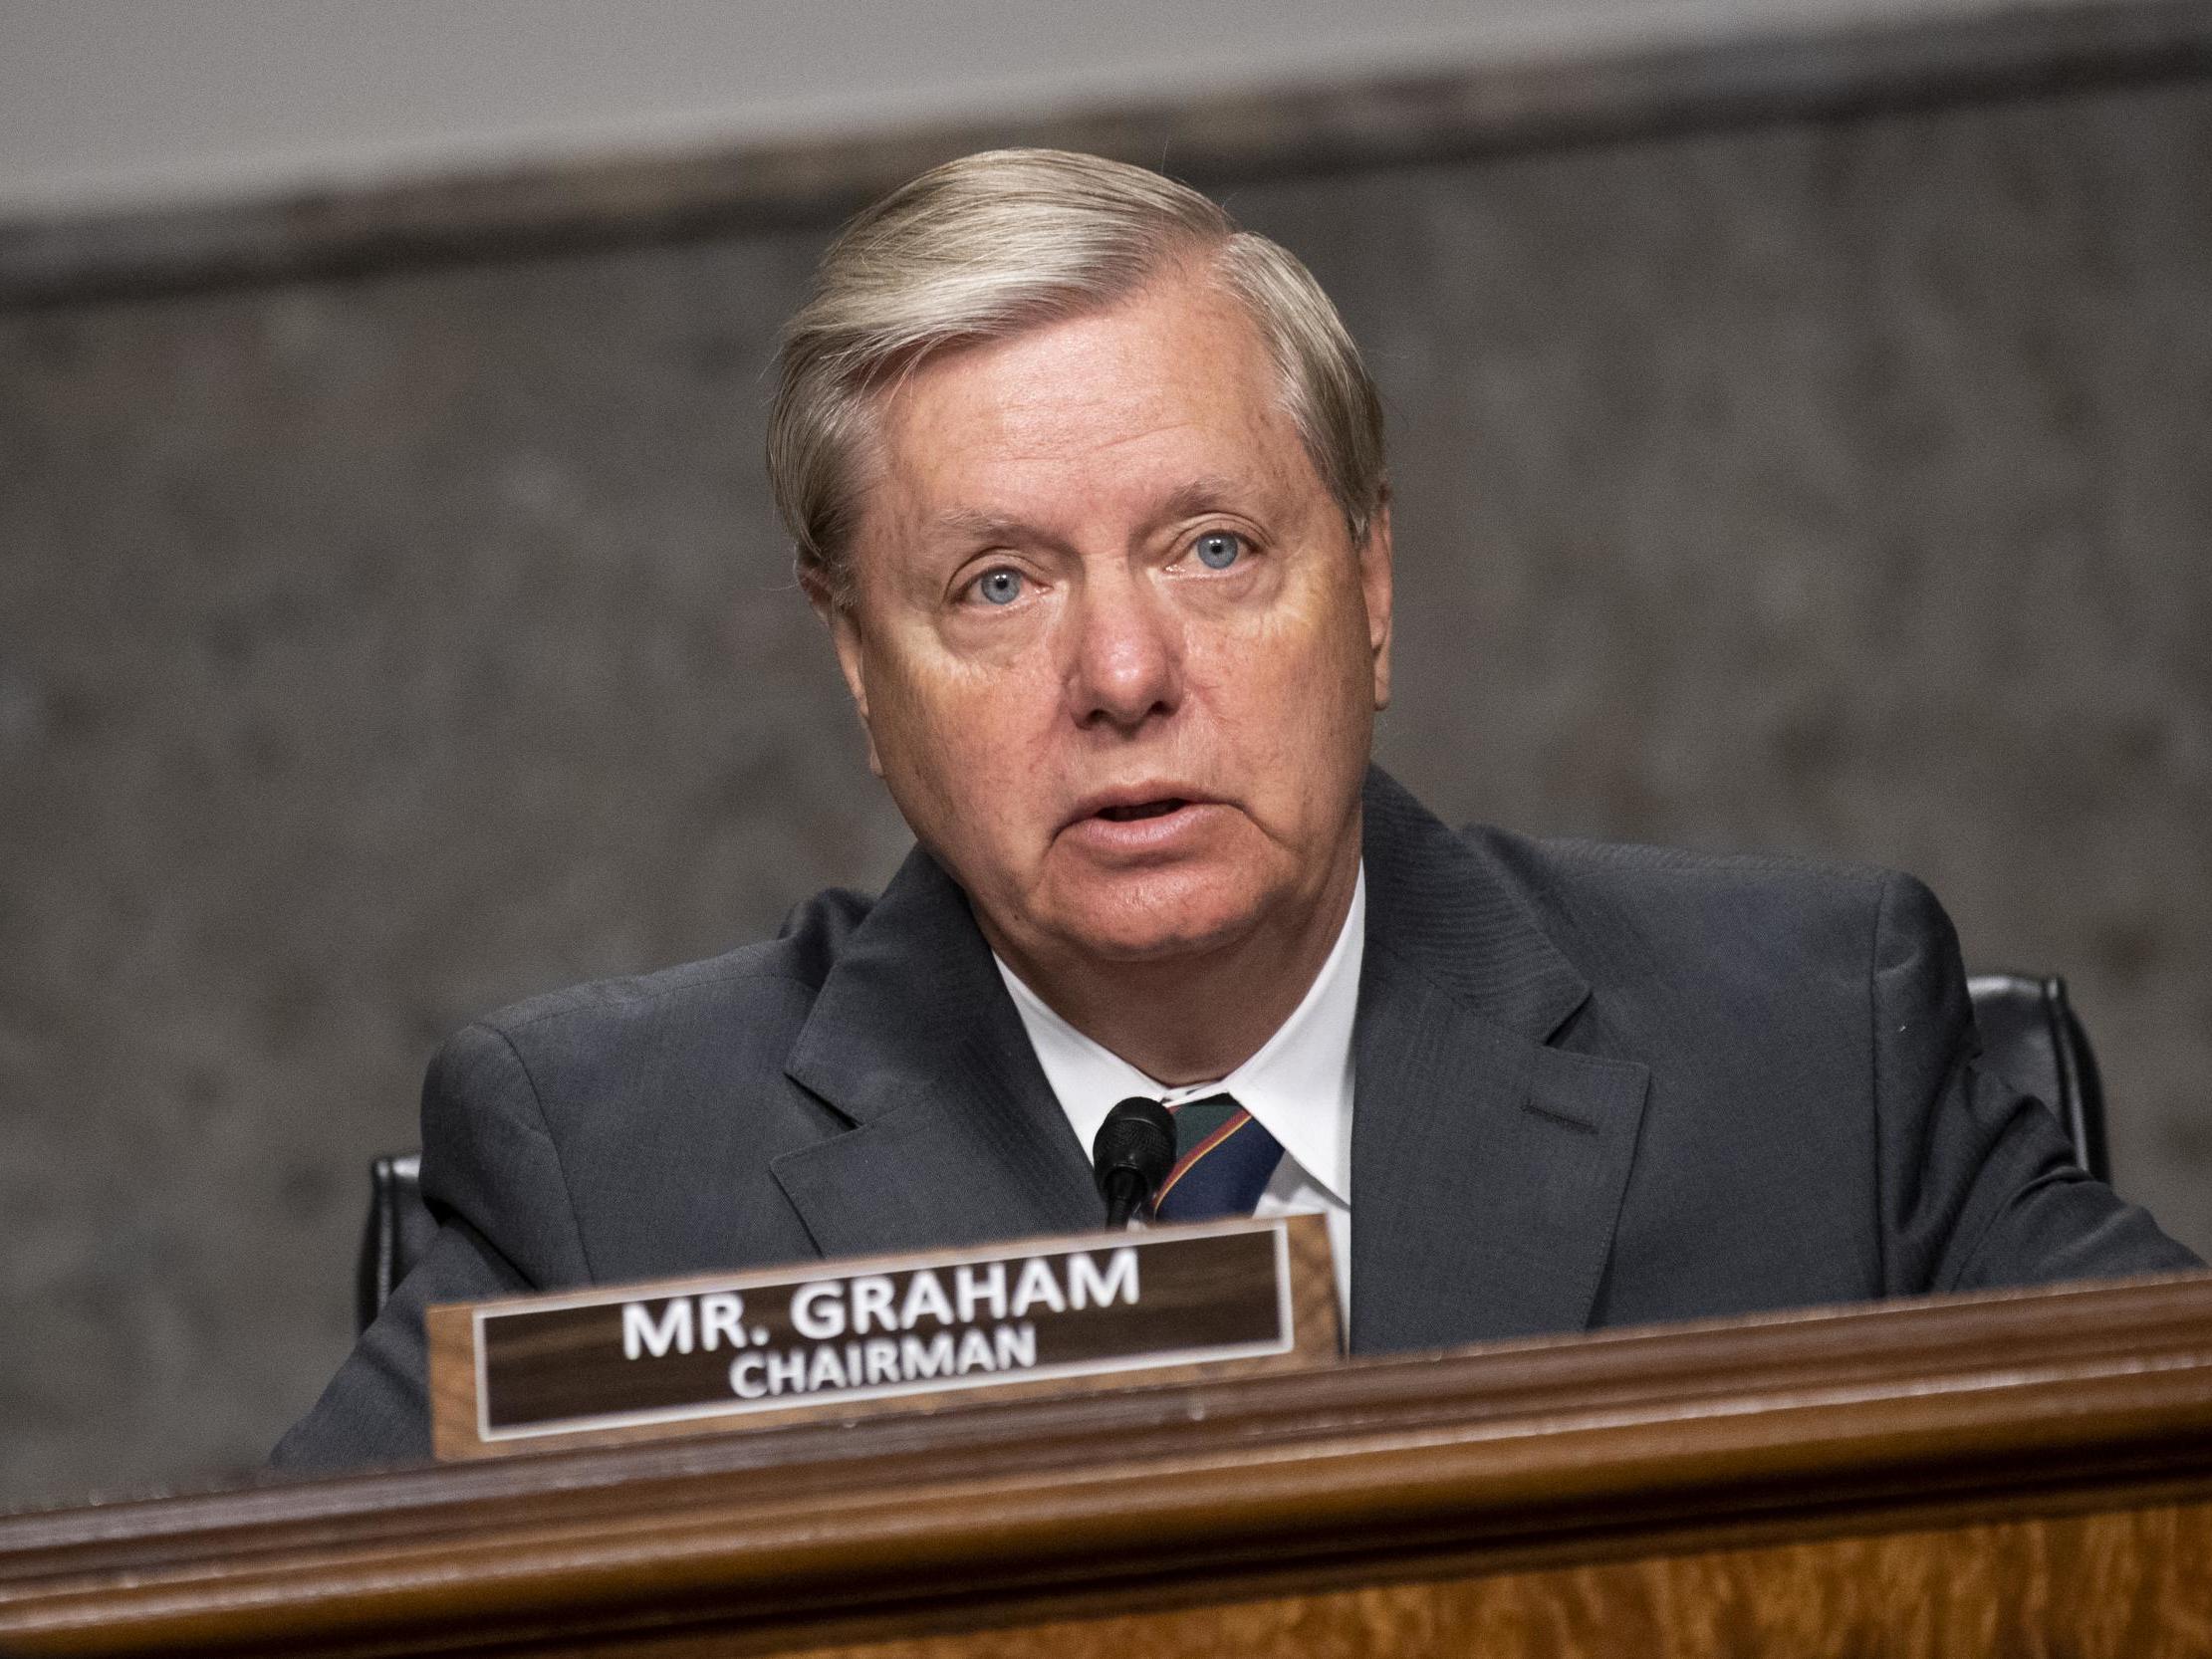 Trump ally Lindsey Graham urges judges in their 60s to retire so they can be replaced before election